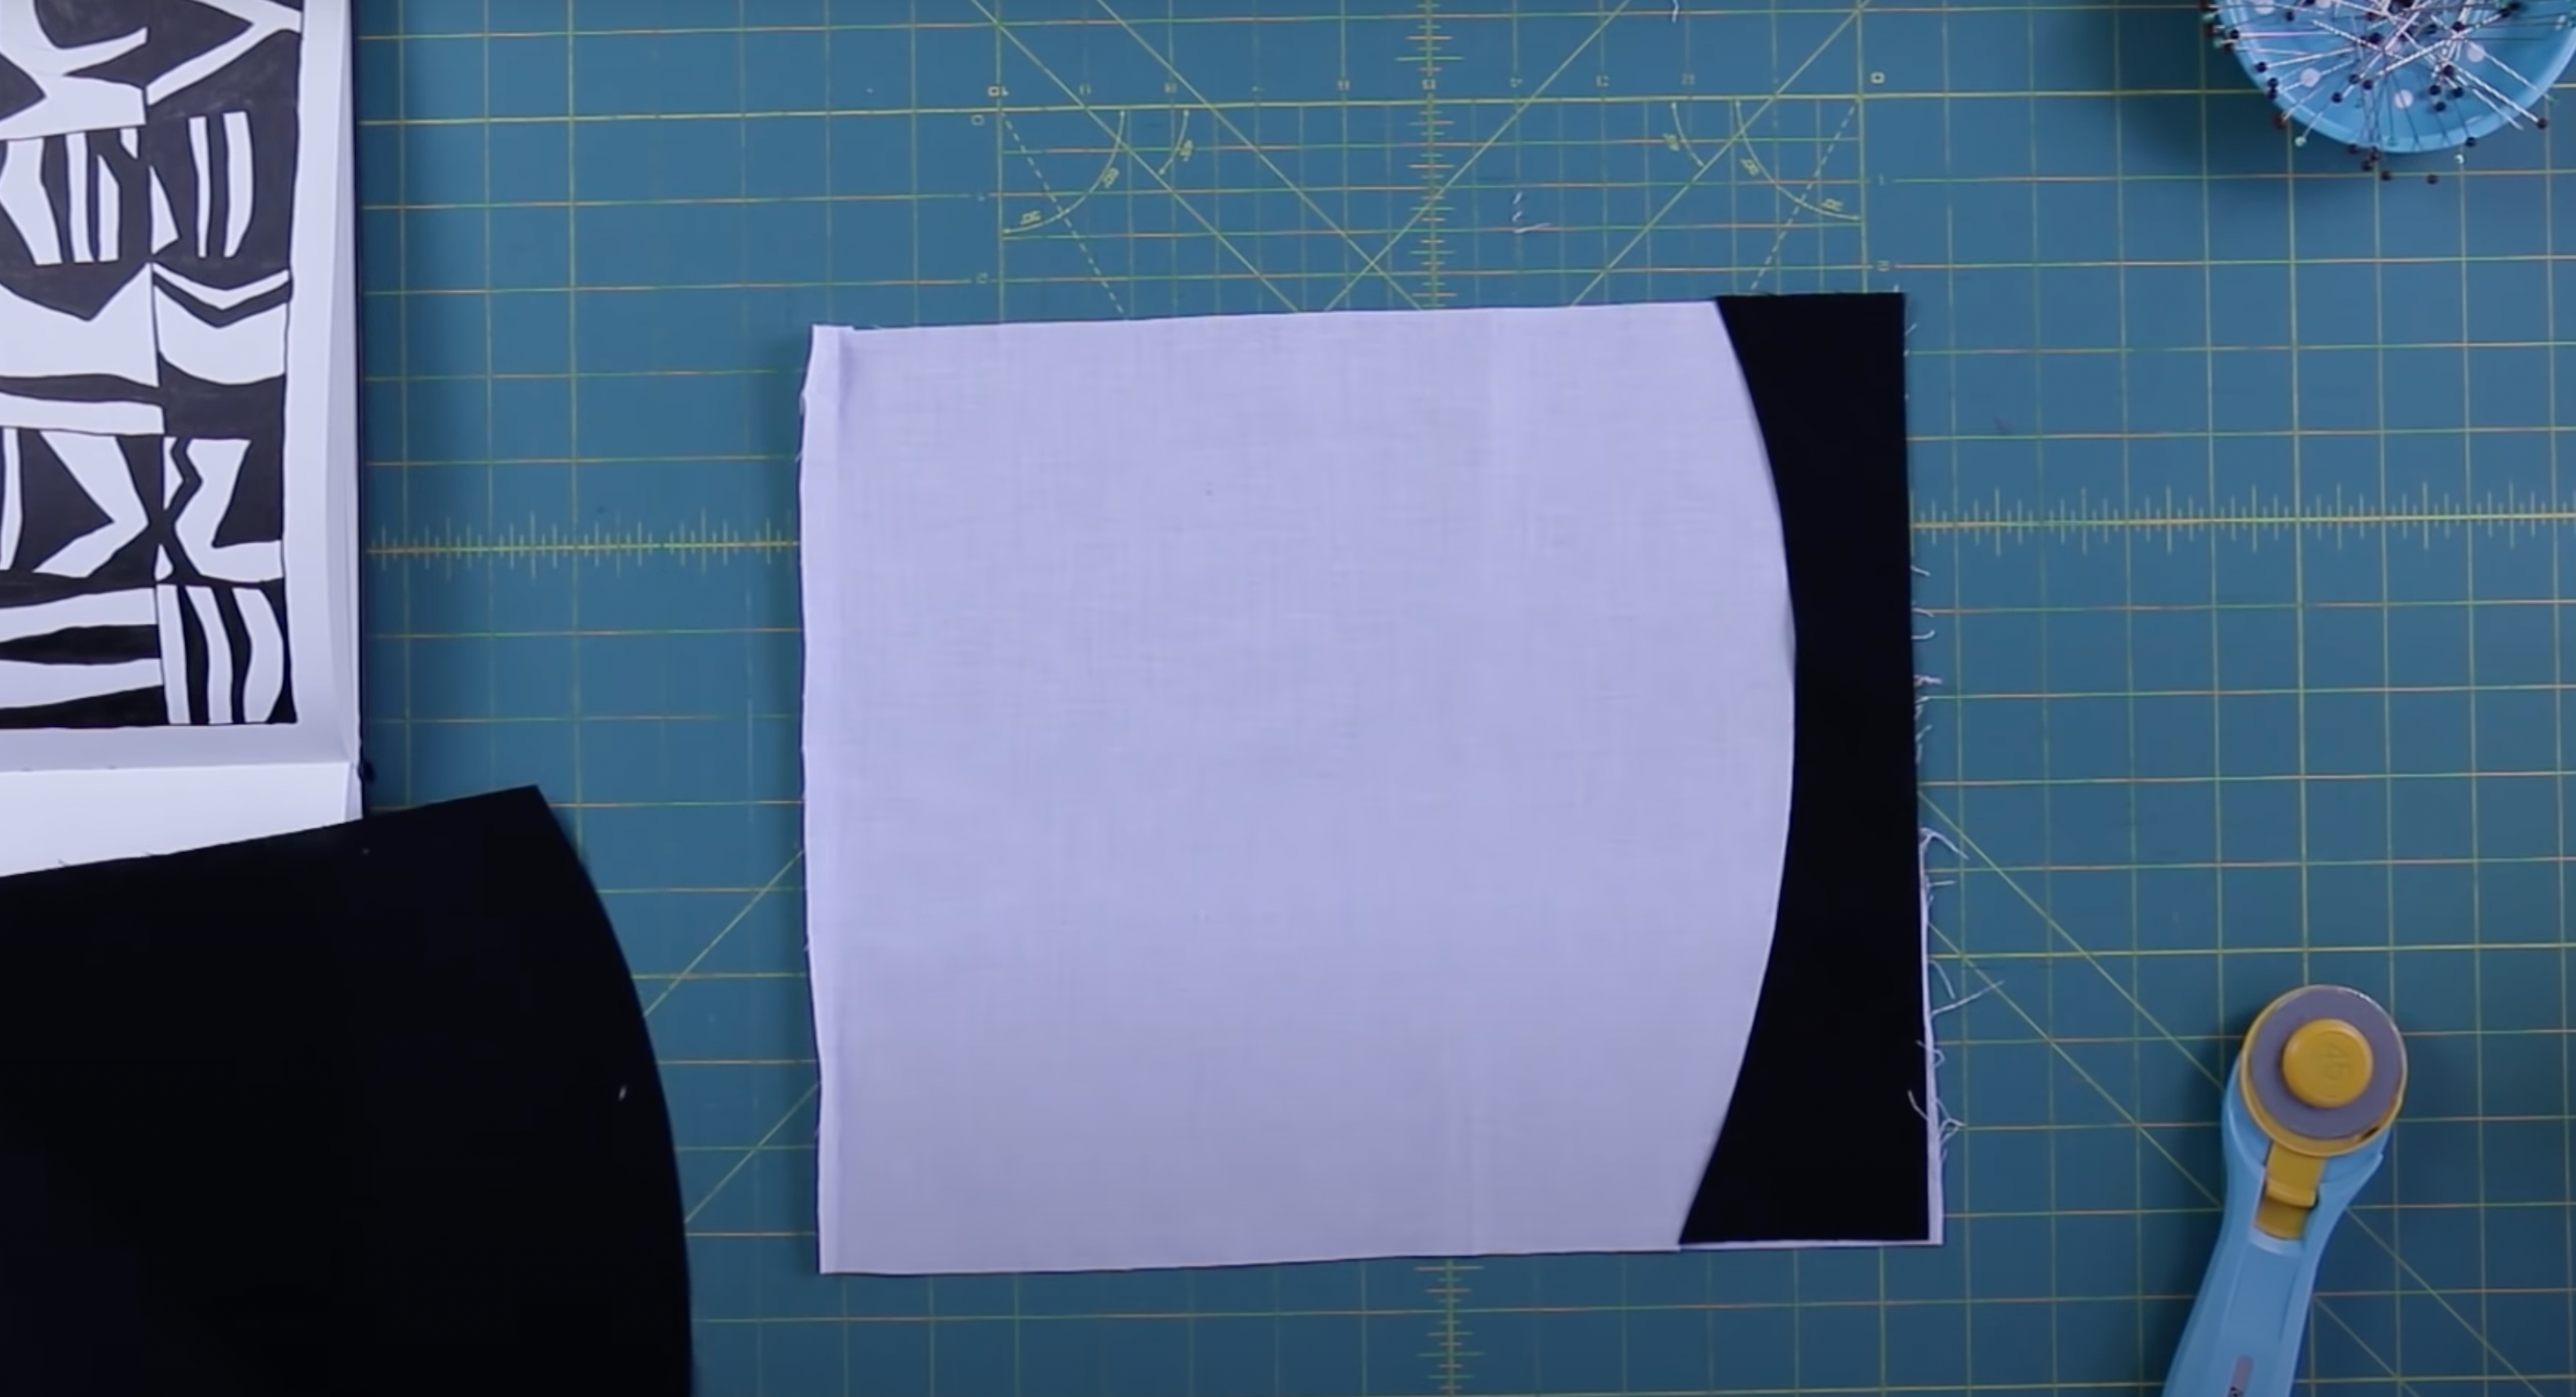 Image shows cutting fabrics for improved curves